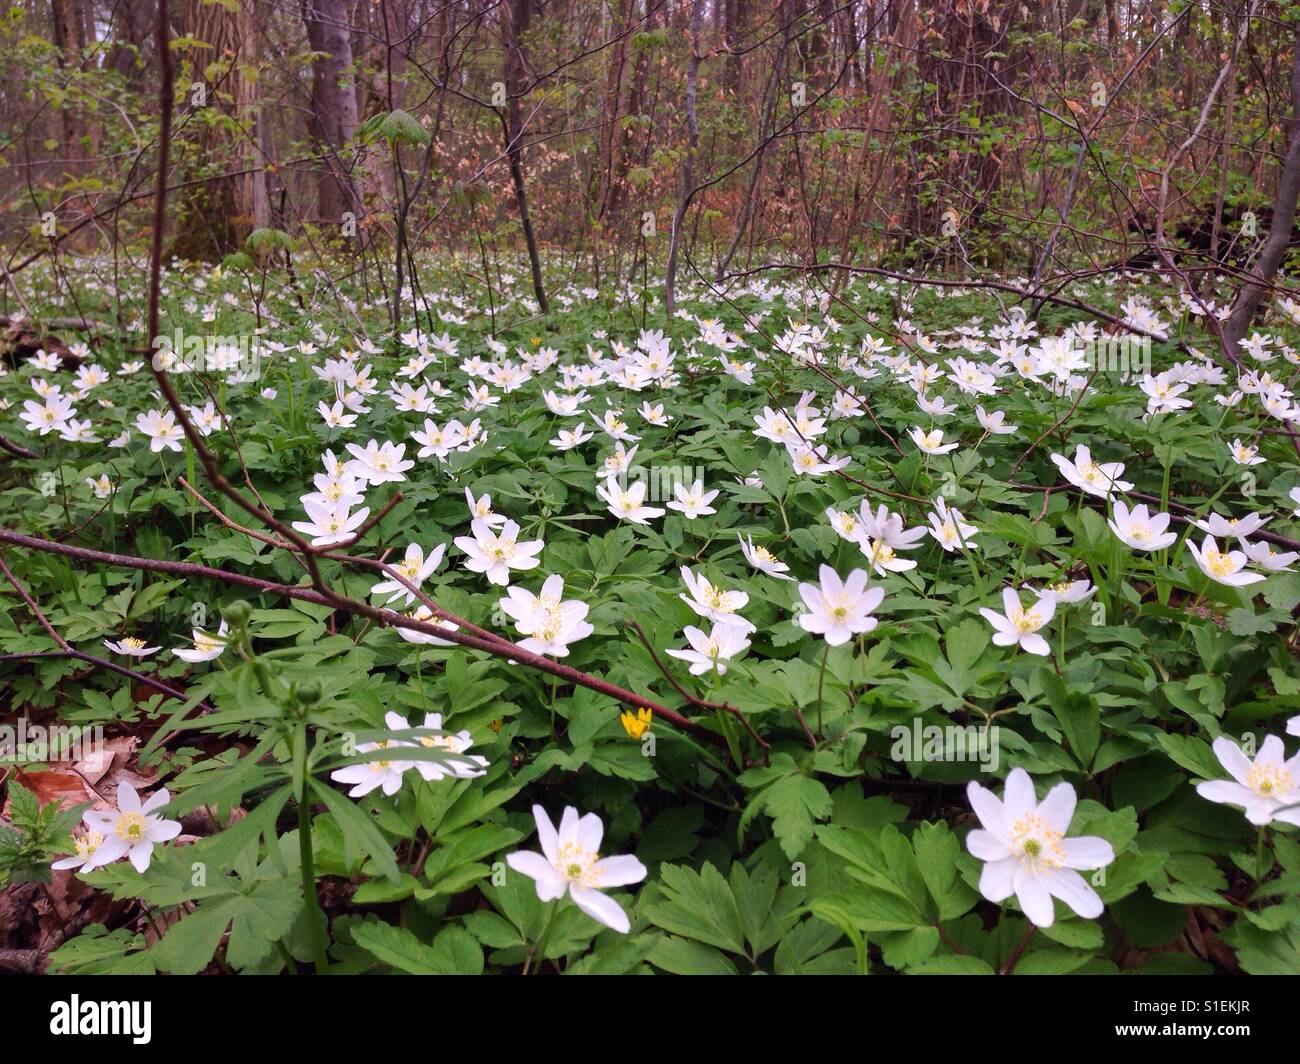 Windflowers in the Hainich National Park, Thuringia, Germany Stock Photo